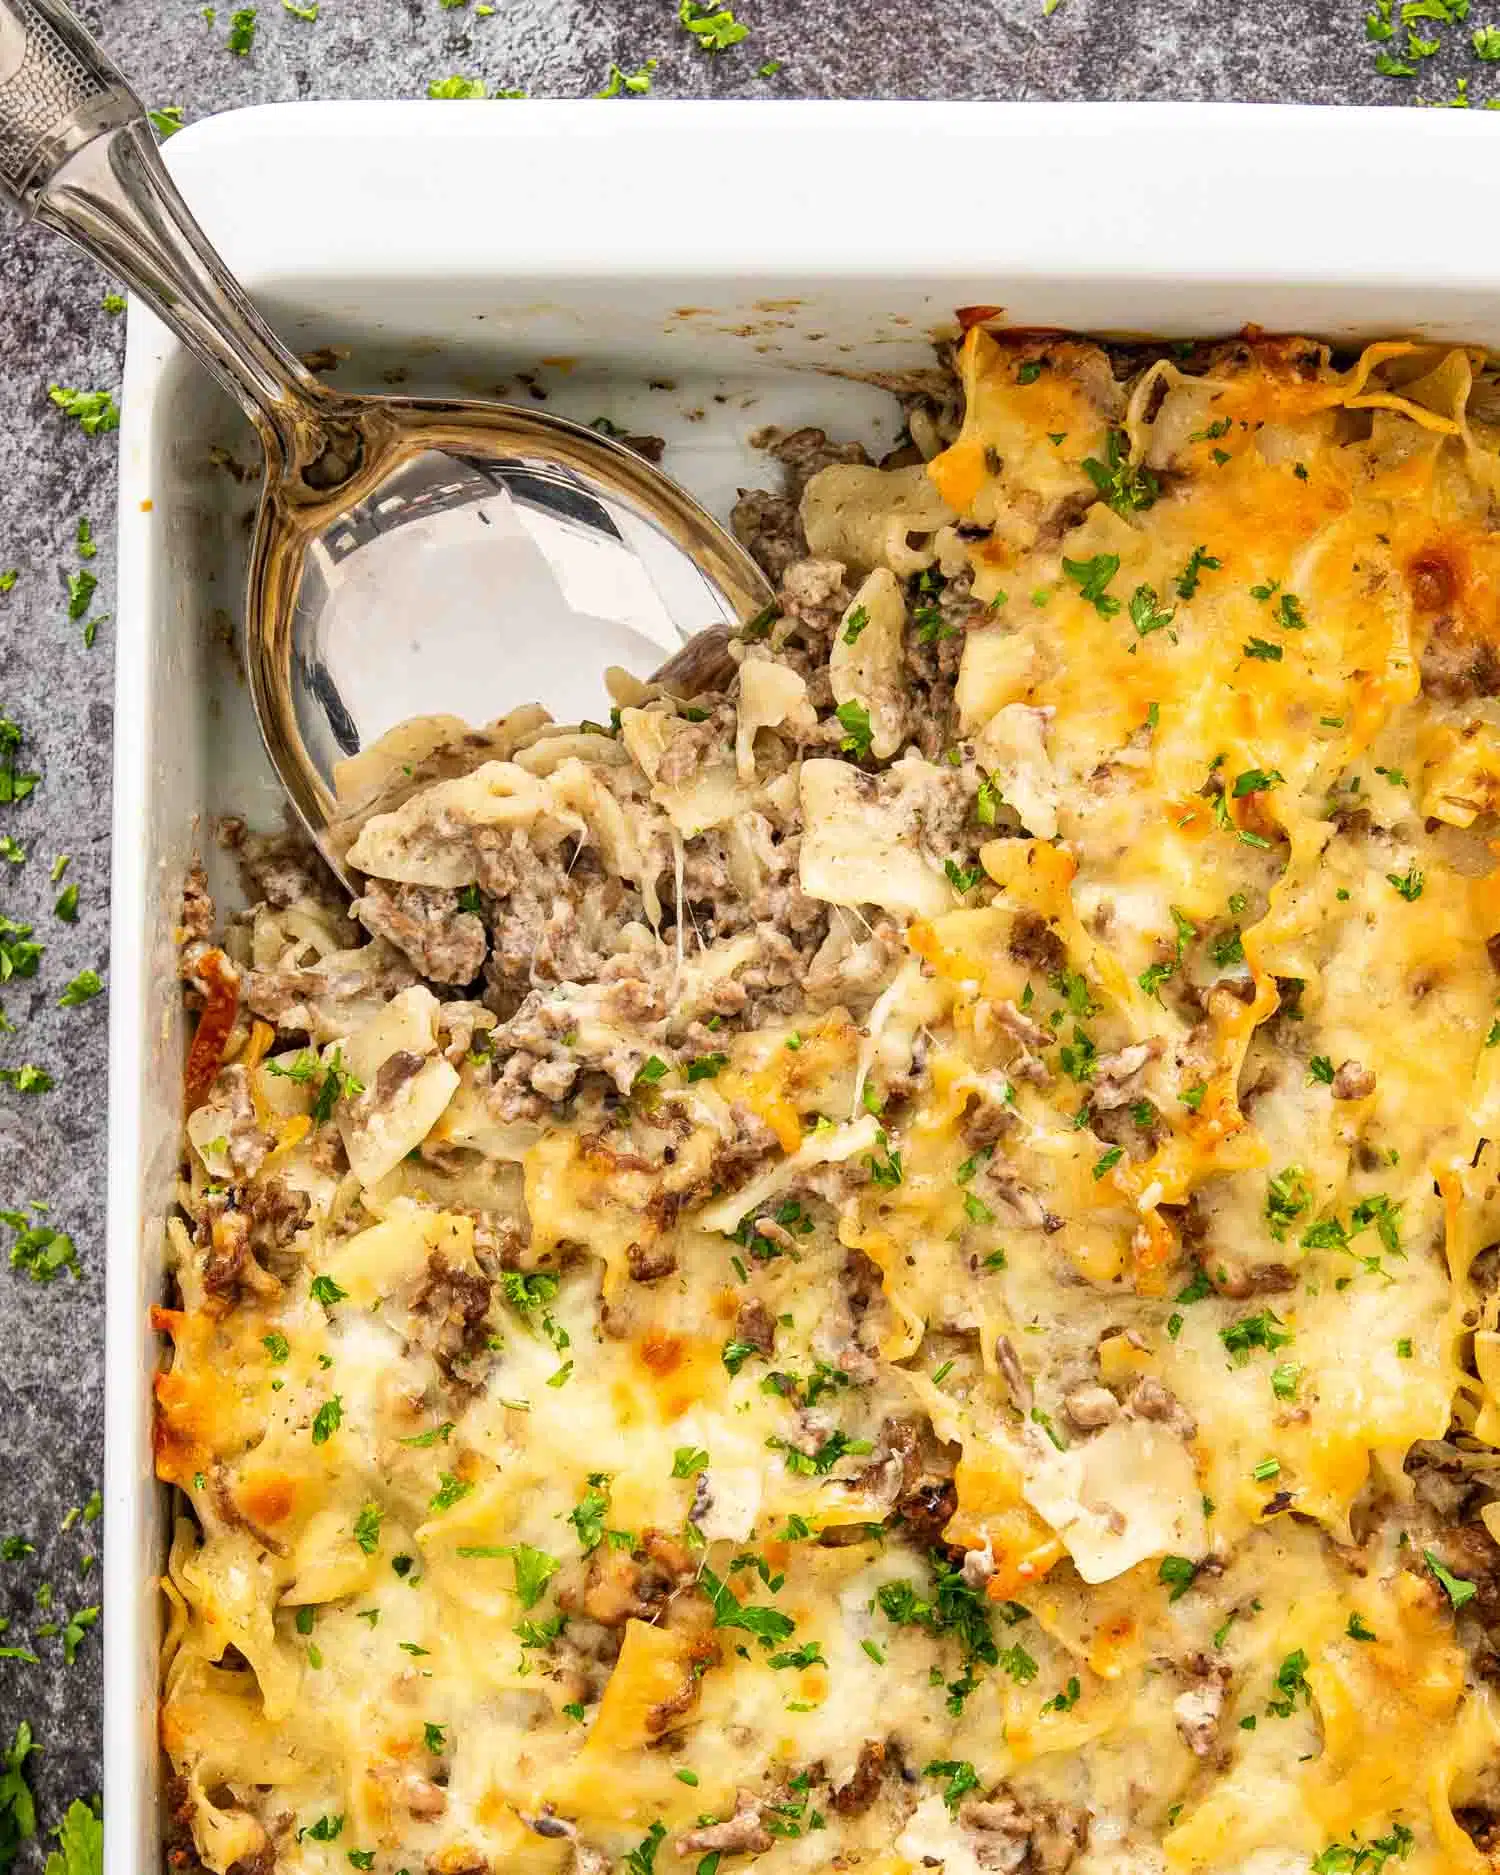 freshly baked beef stroganoff casserole in a white casserole dish garnished with parsley.